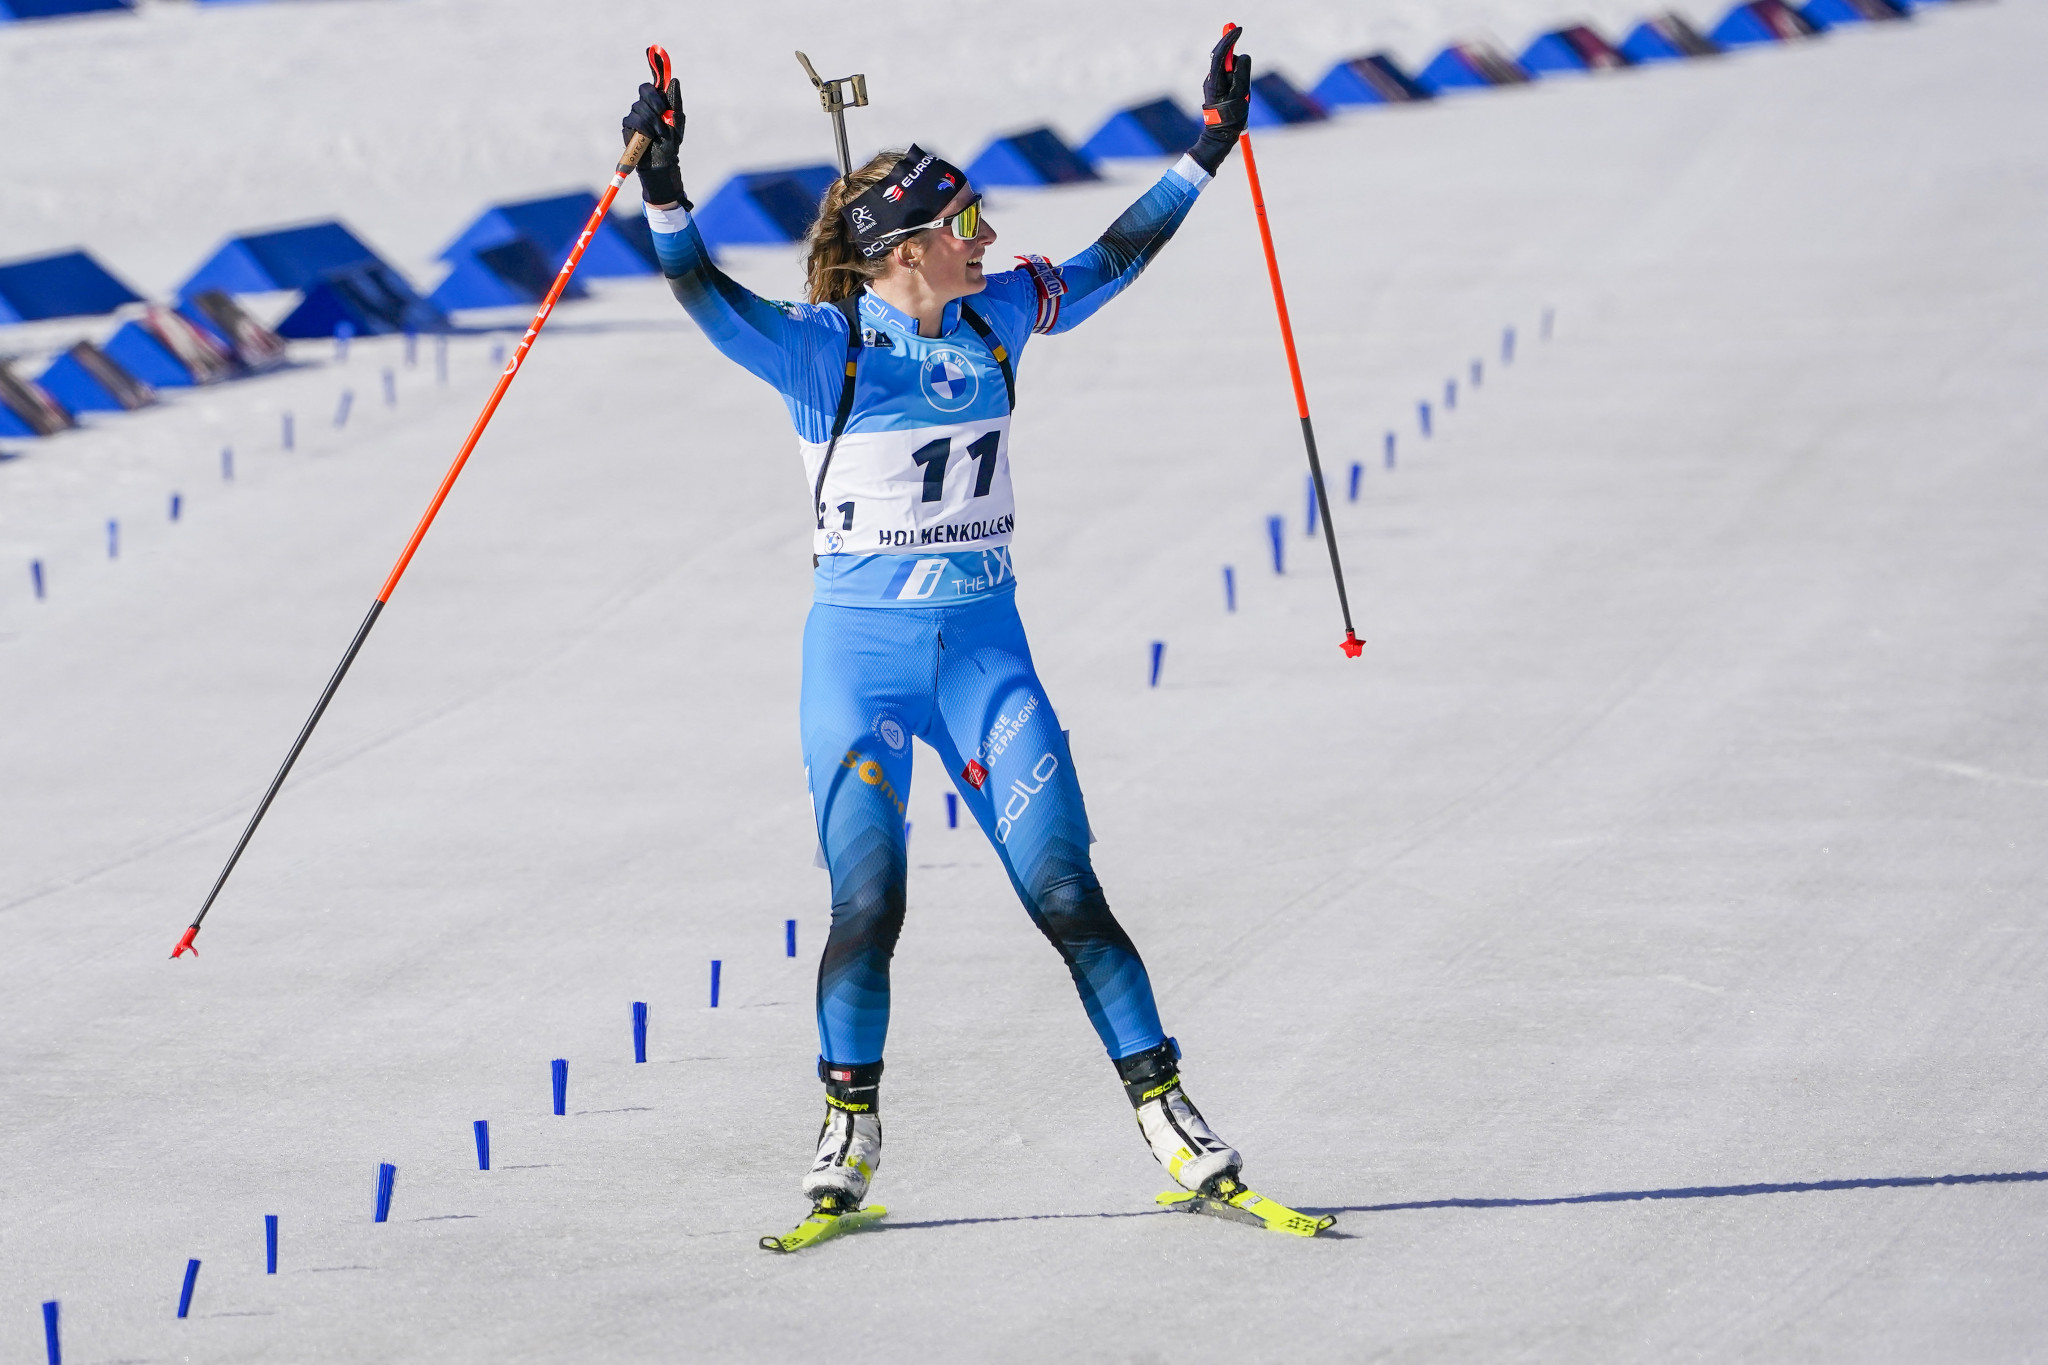 
Justine Braisaz-Bouchet of France reached the podium of the women's 12.5km mass start event at the IBU Biathlon World Cup in Holmenkollen ©Getty Images